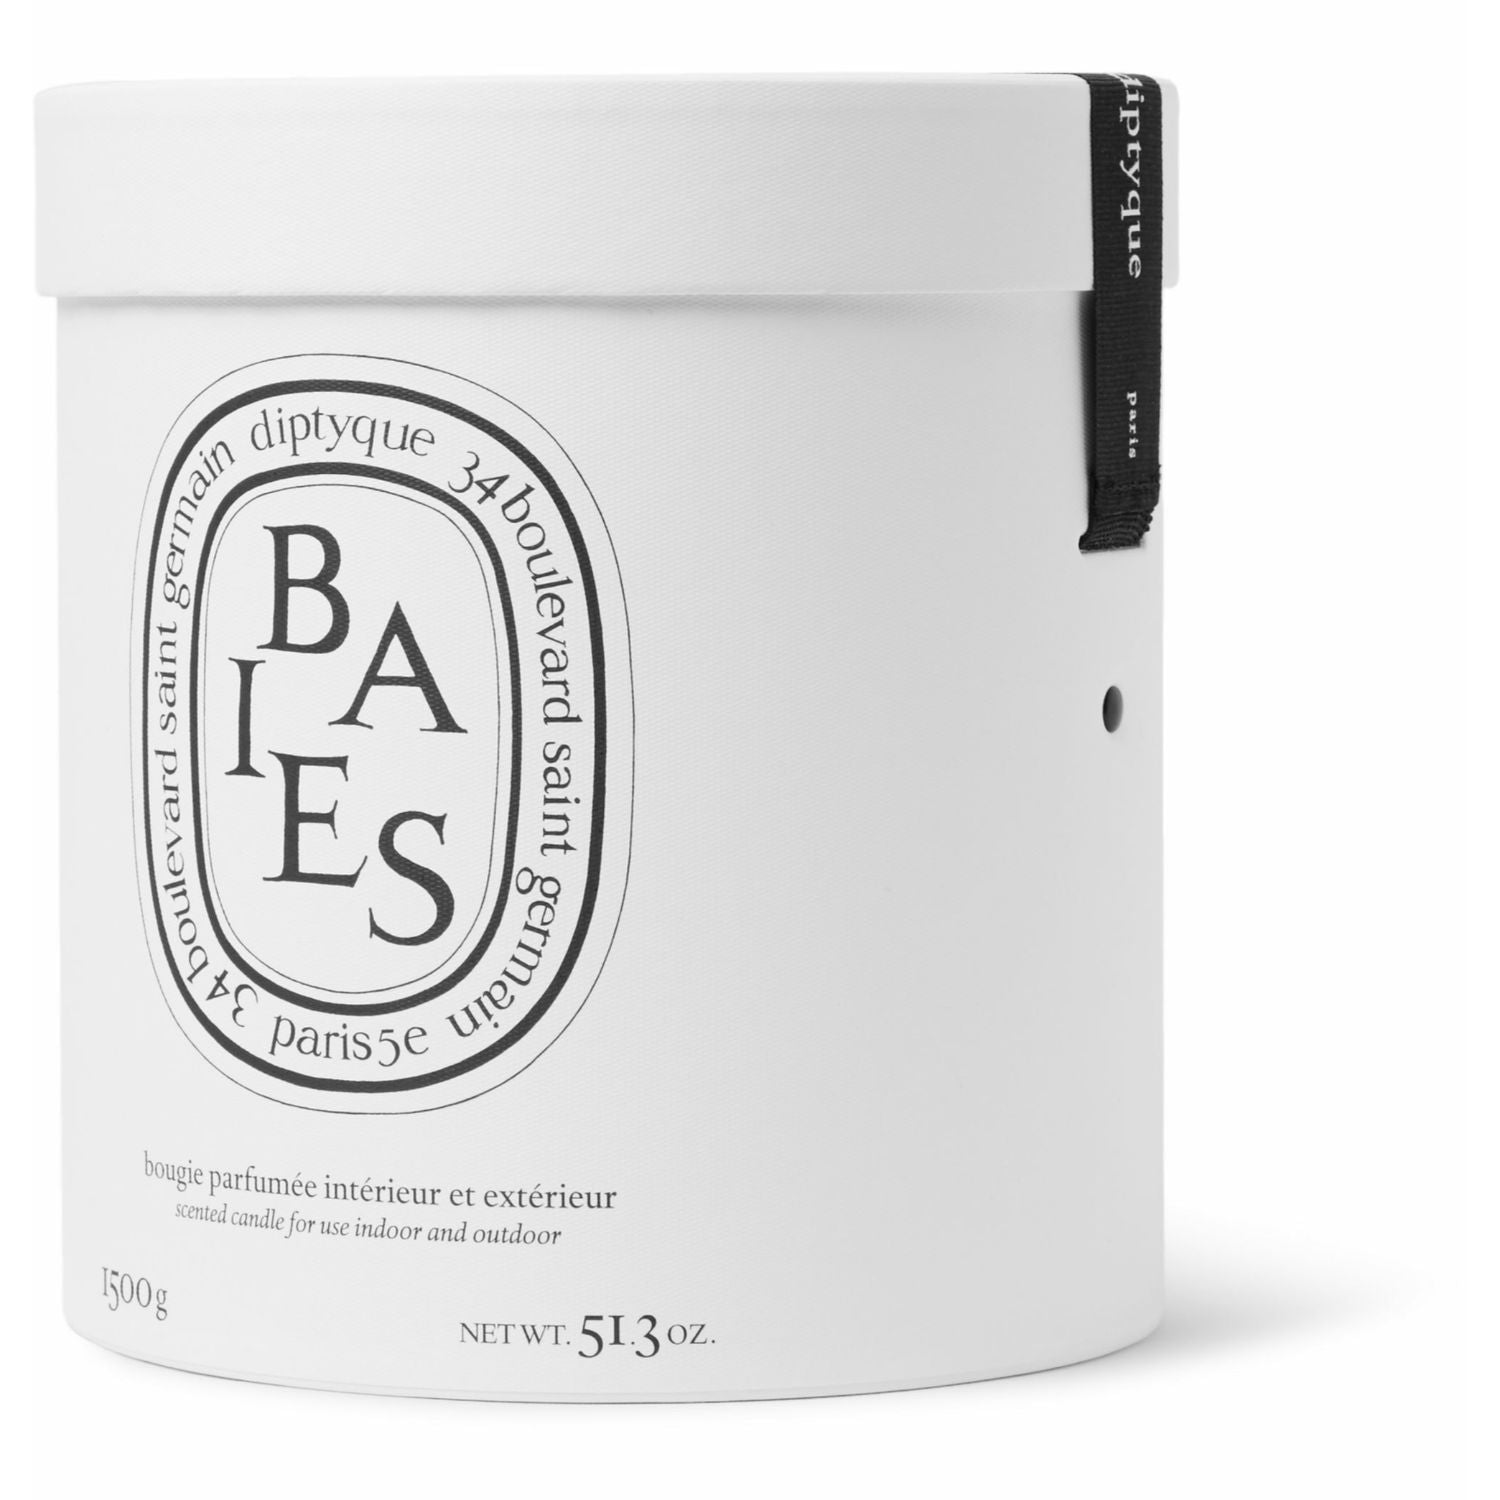 DIPTYQUE BAIES SCENTED CANDLE 1500G - Misc - 1500G